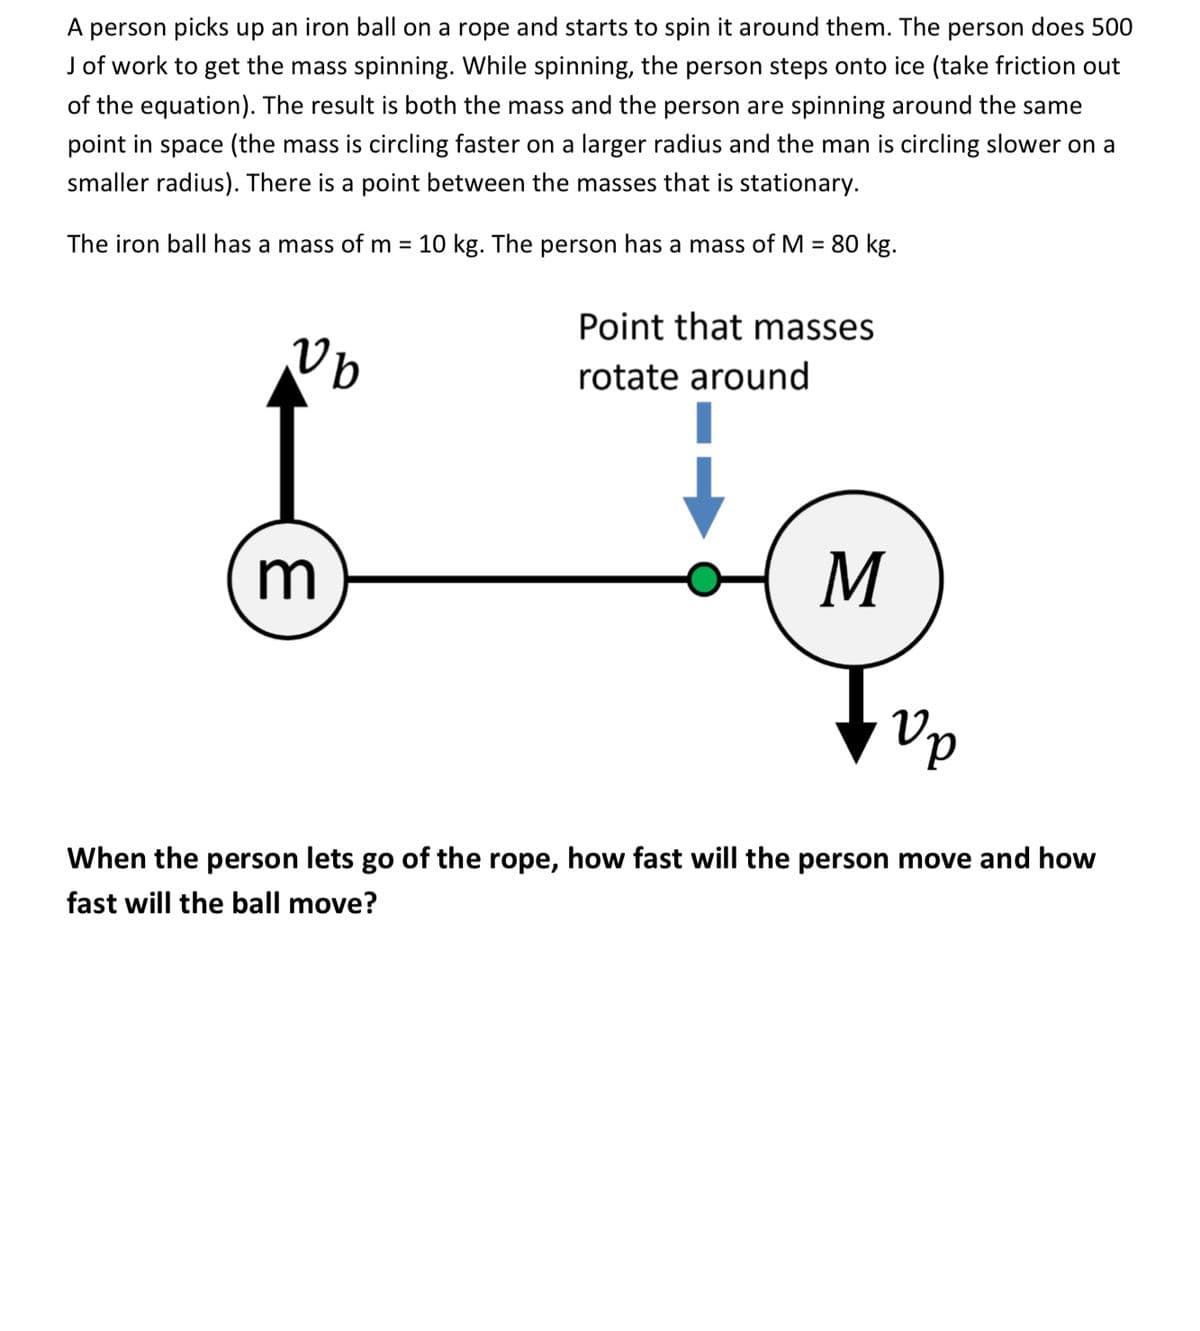 A person picks up an iron ball on a rope and starts to spin it around them. The person does 500
J of work to get the mass spinning. While spinning, the person steps onto ice (take friction out
of the equation). The result is both the mass and the person are spinning around the same
point in space (the mass is circling faster on a larger radius and the man is circling slower on a
smaller radius). There is a point between the masses that is stationary.
The iron ball has a mass of m = 10 kg. The person has a mass of M = 80 kg.
3
vb
Point that masses
rotate around
M
Vp
When the person lets go of the rope, how fast will the person move and how
fast will the ball move?